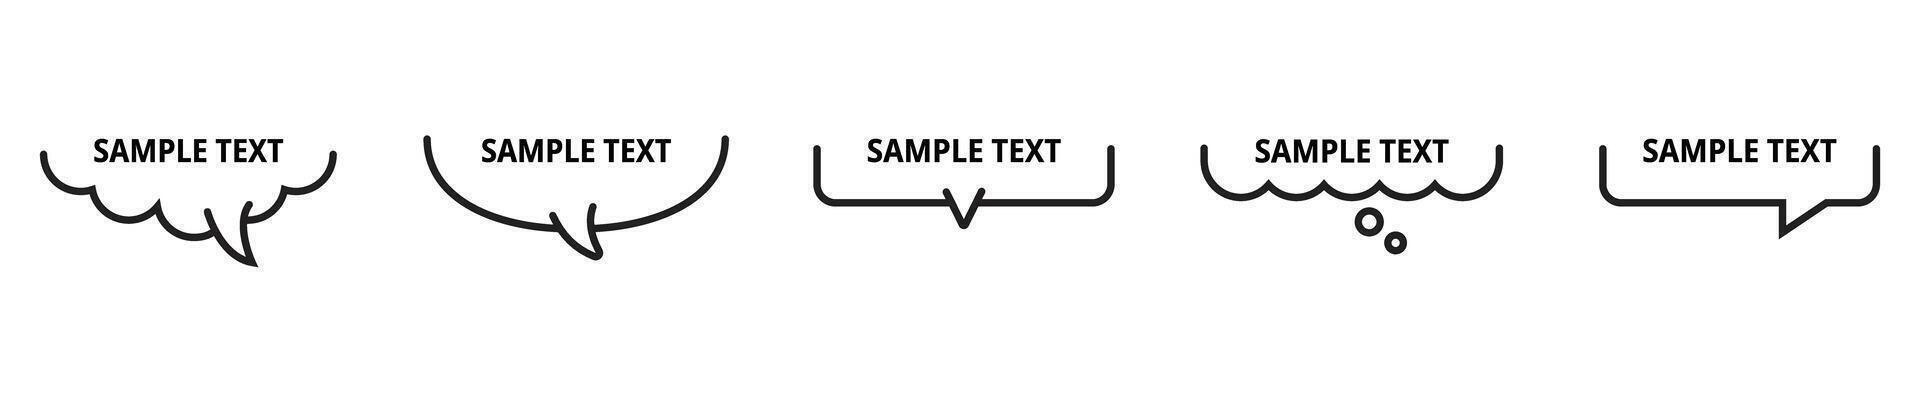 simple frame for text half buble chat cute shape vector